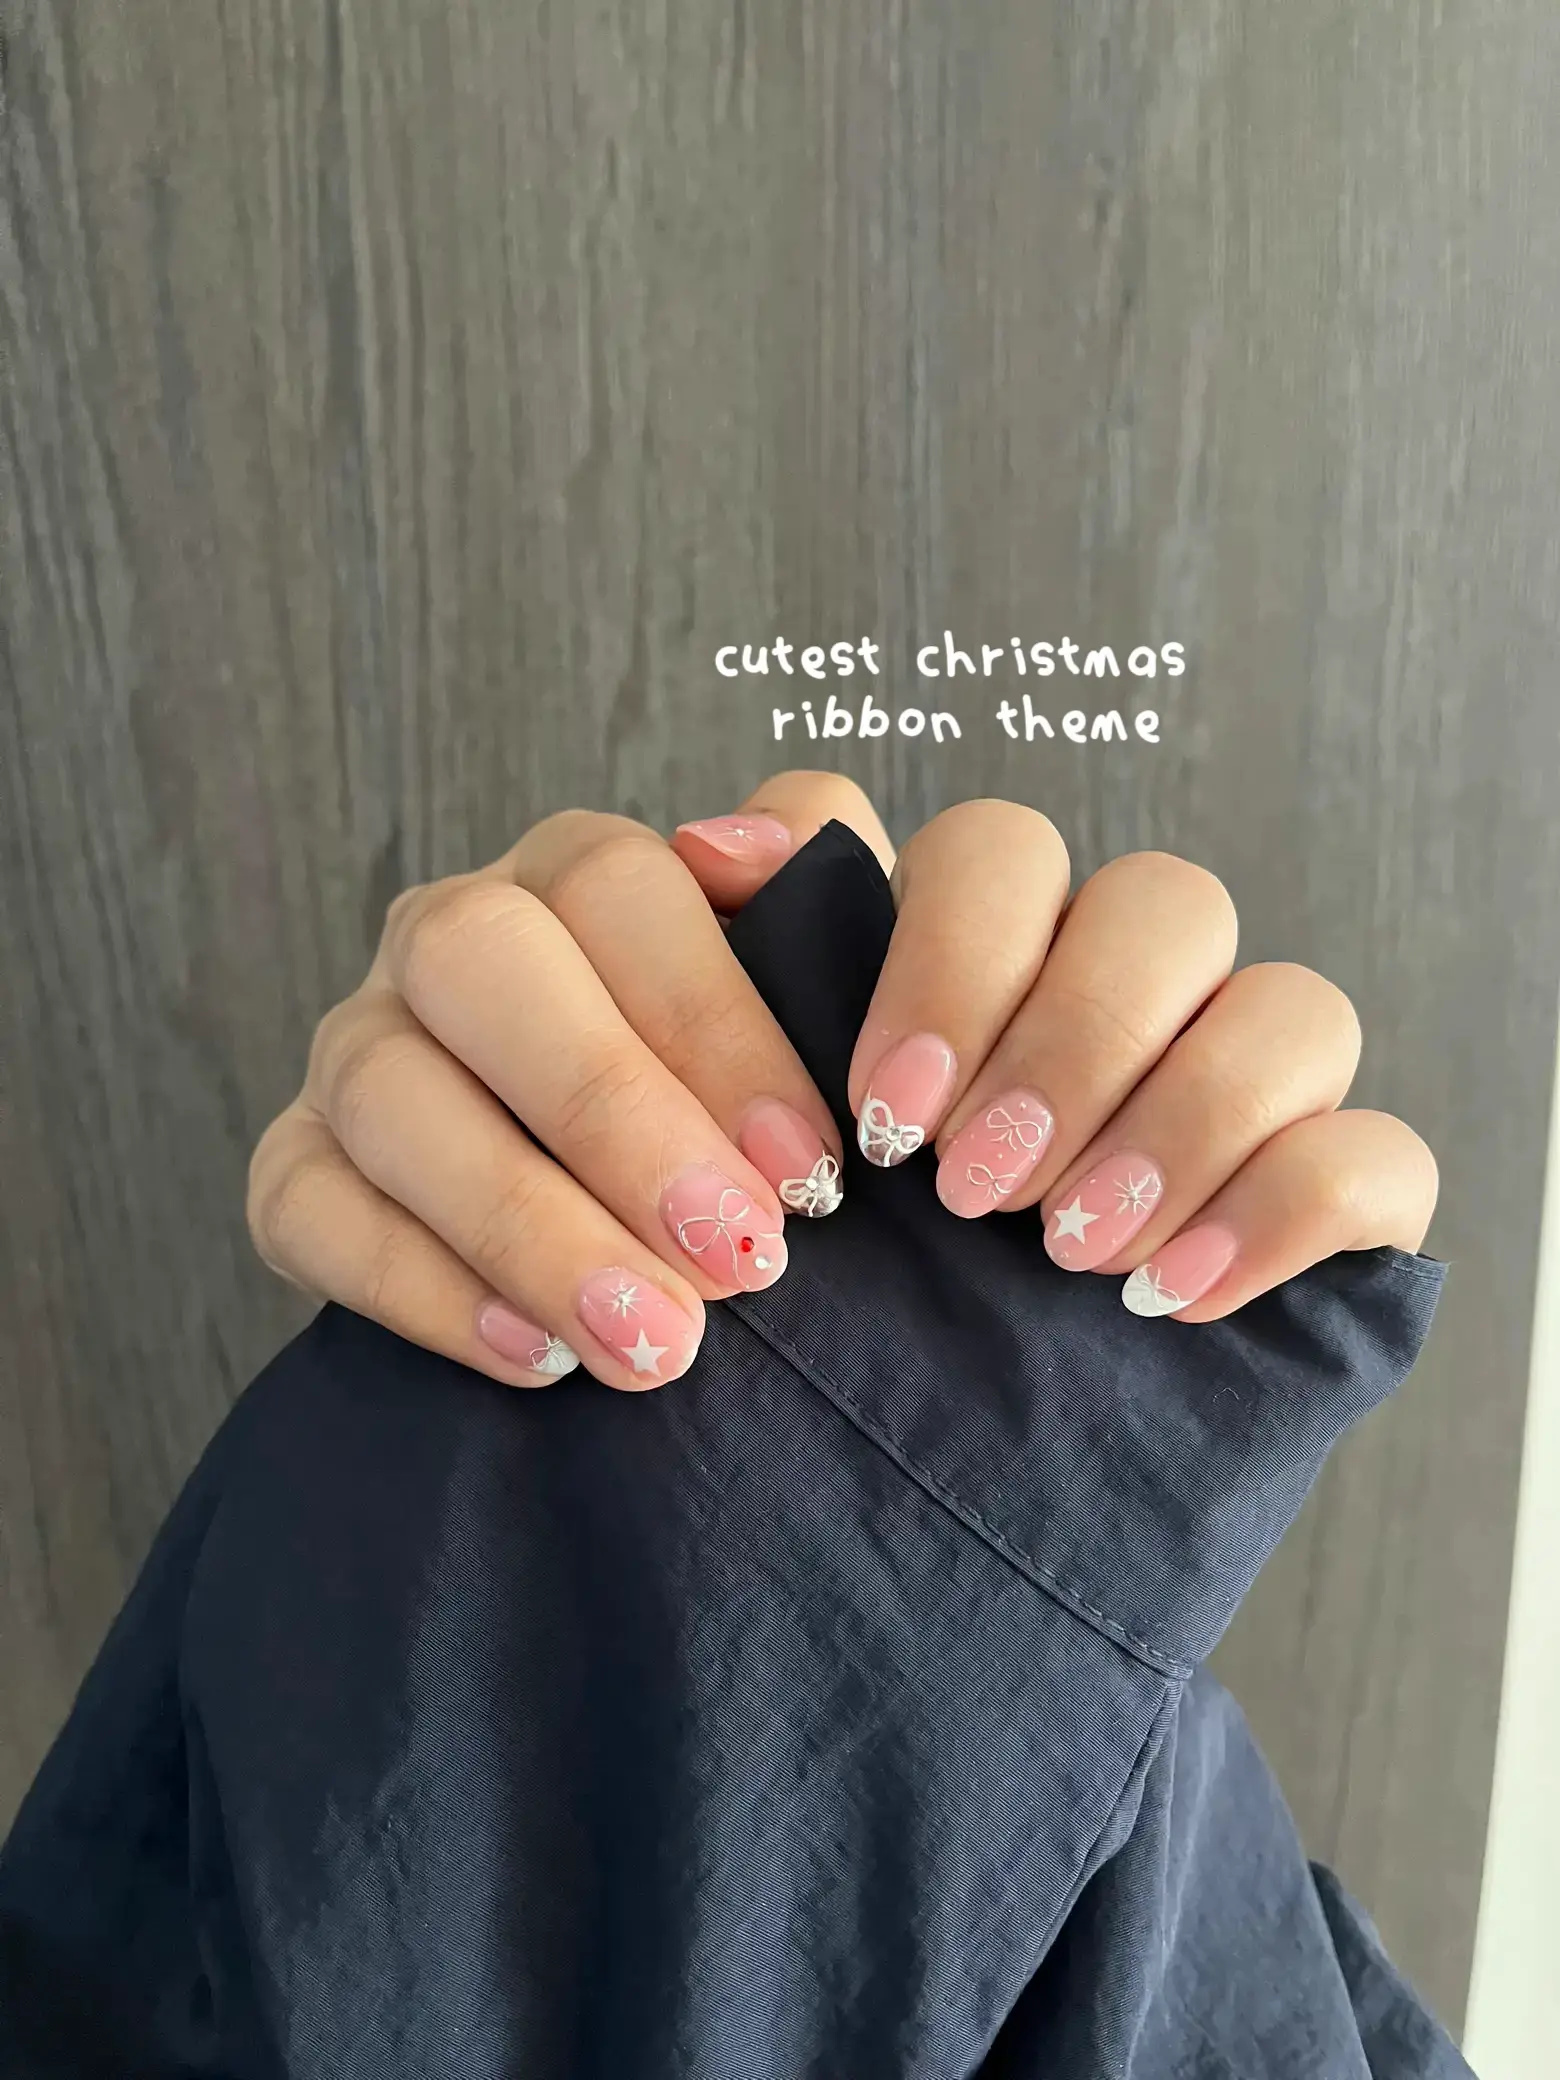 SAVE THIS! PRETTY NAILS AT FAR EAST PLAZA 🎀 | Gallery posted by vanessa ...